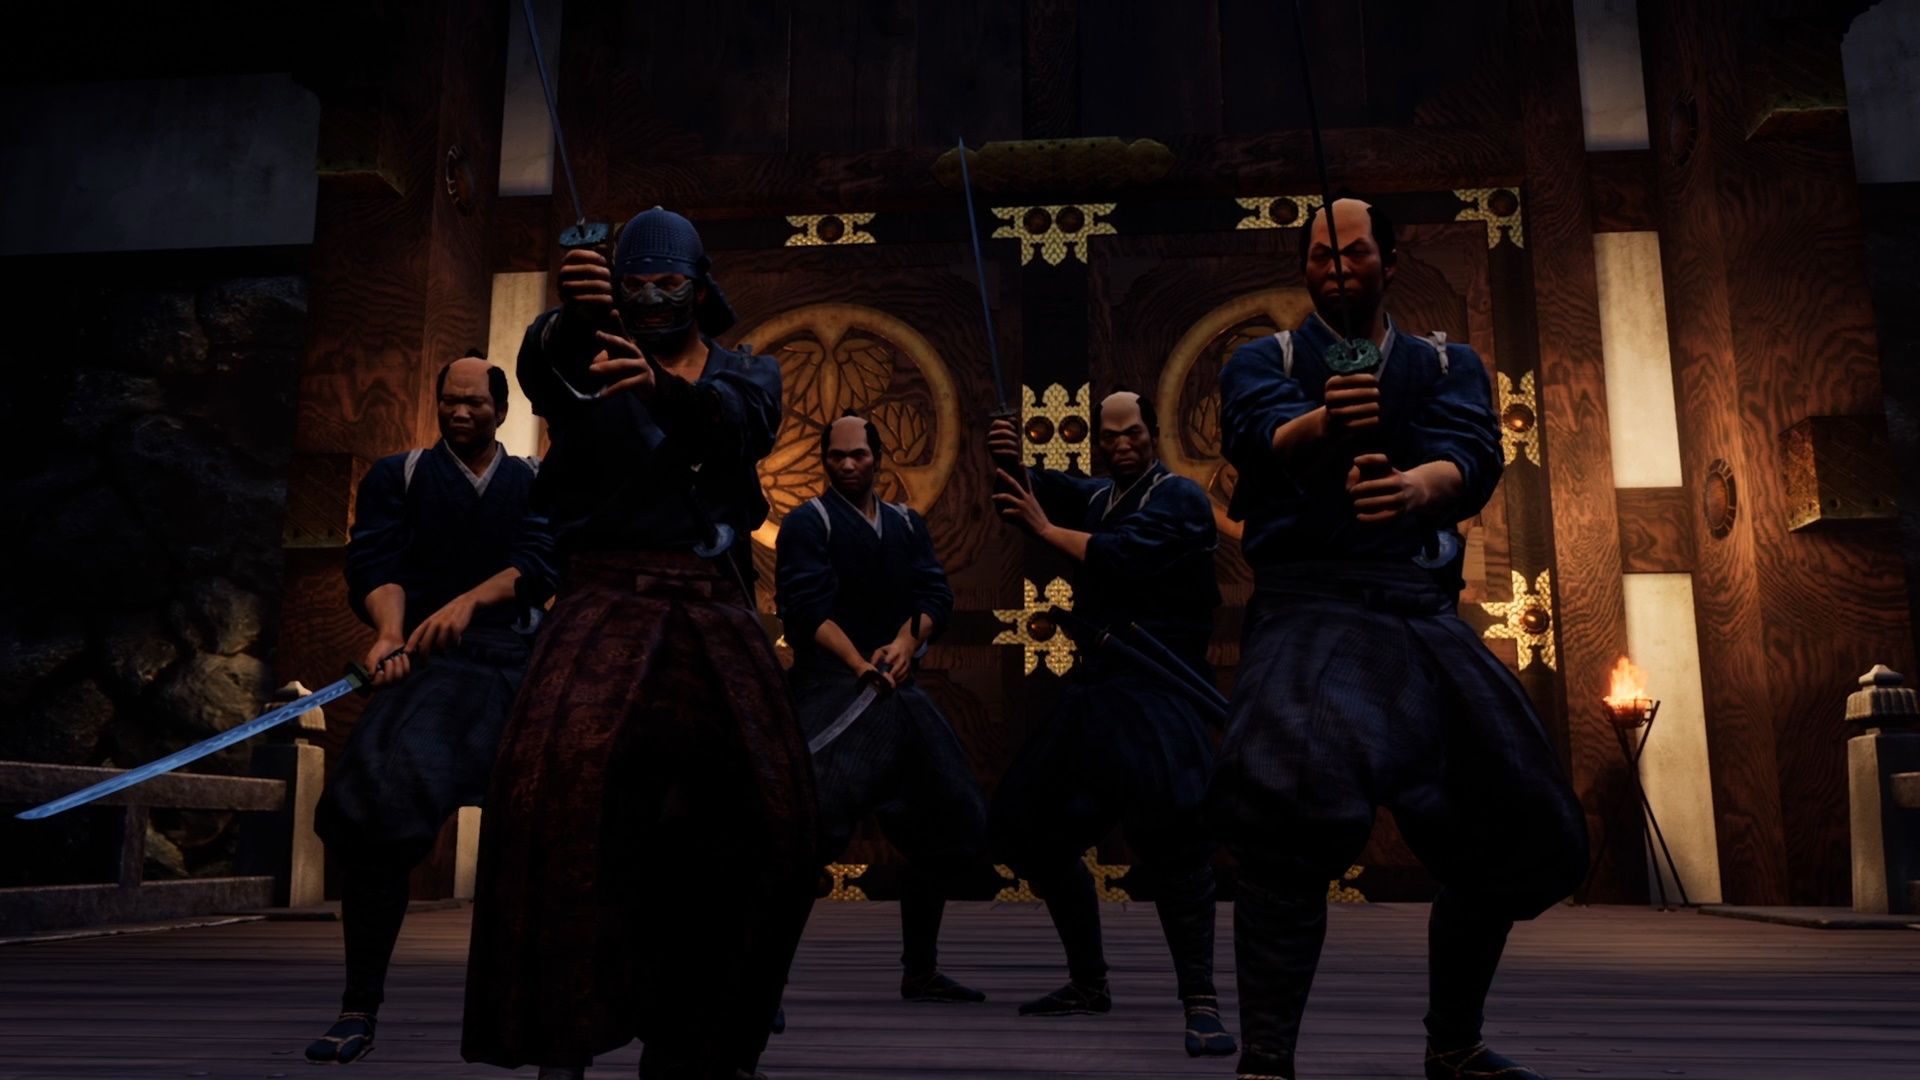 Like A Dragon Ishin, The tough batch of the emperor's guards